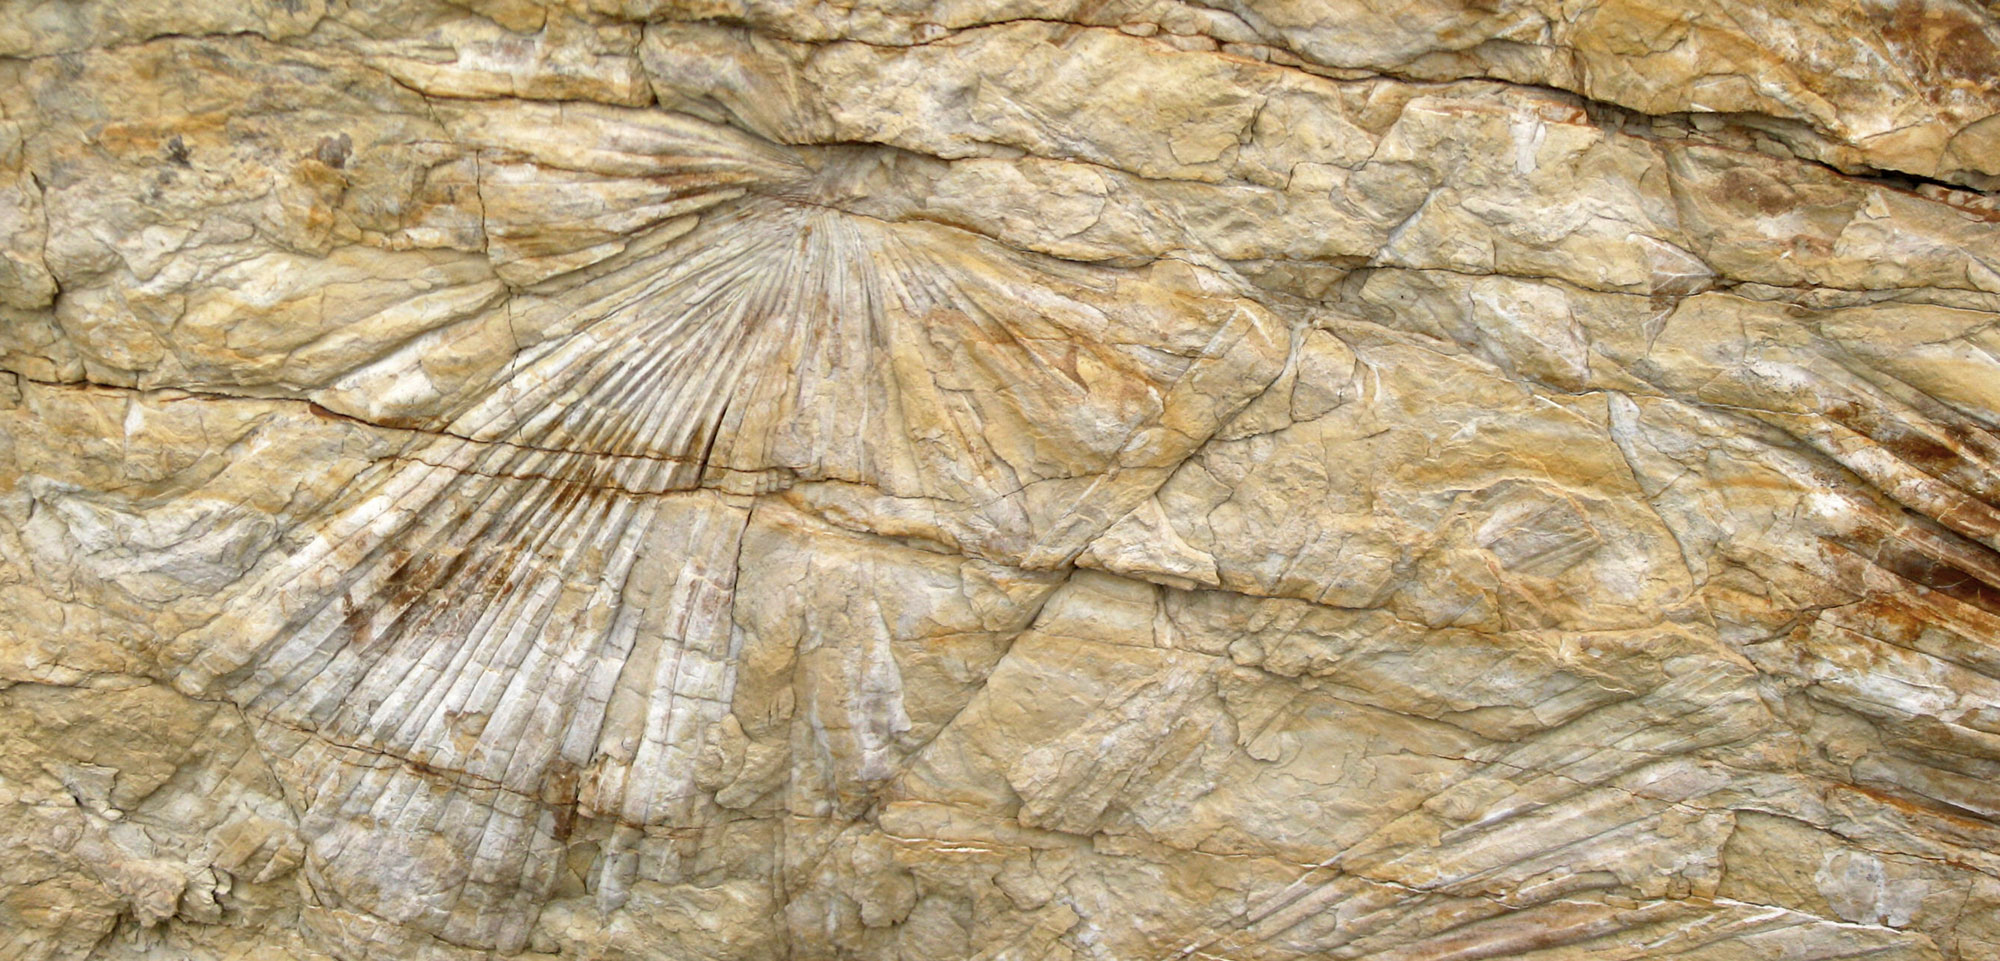 Photograph of palm frond impressions from the Cretaceous of Colorado. The photo shows a light brown vertical rock face with fan-like impressions representing palm leaves.